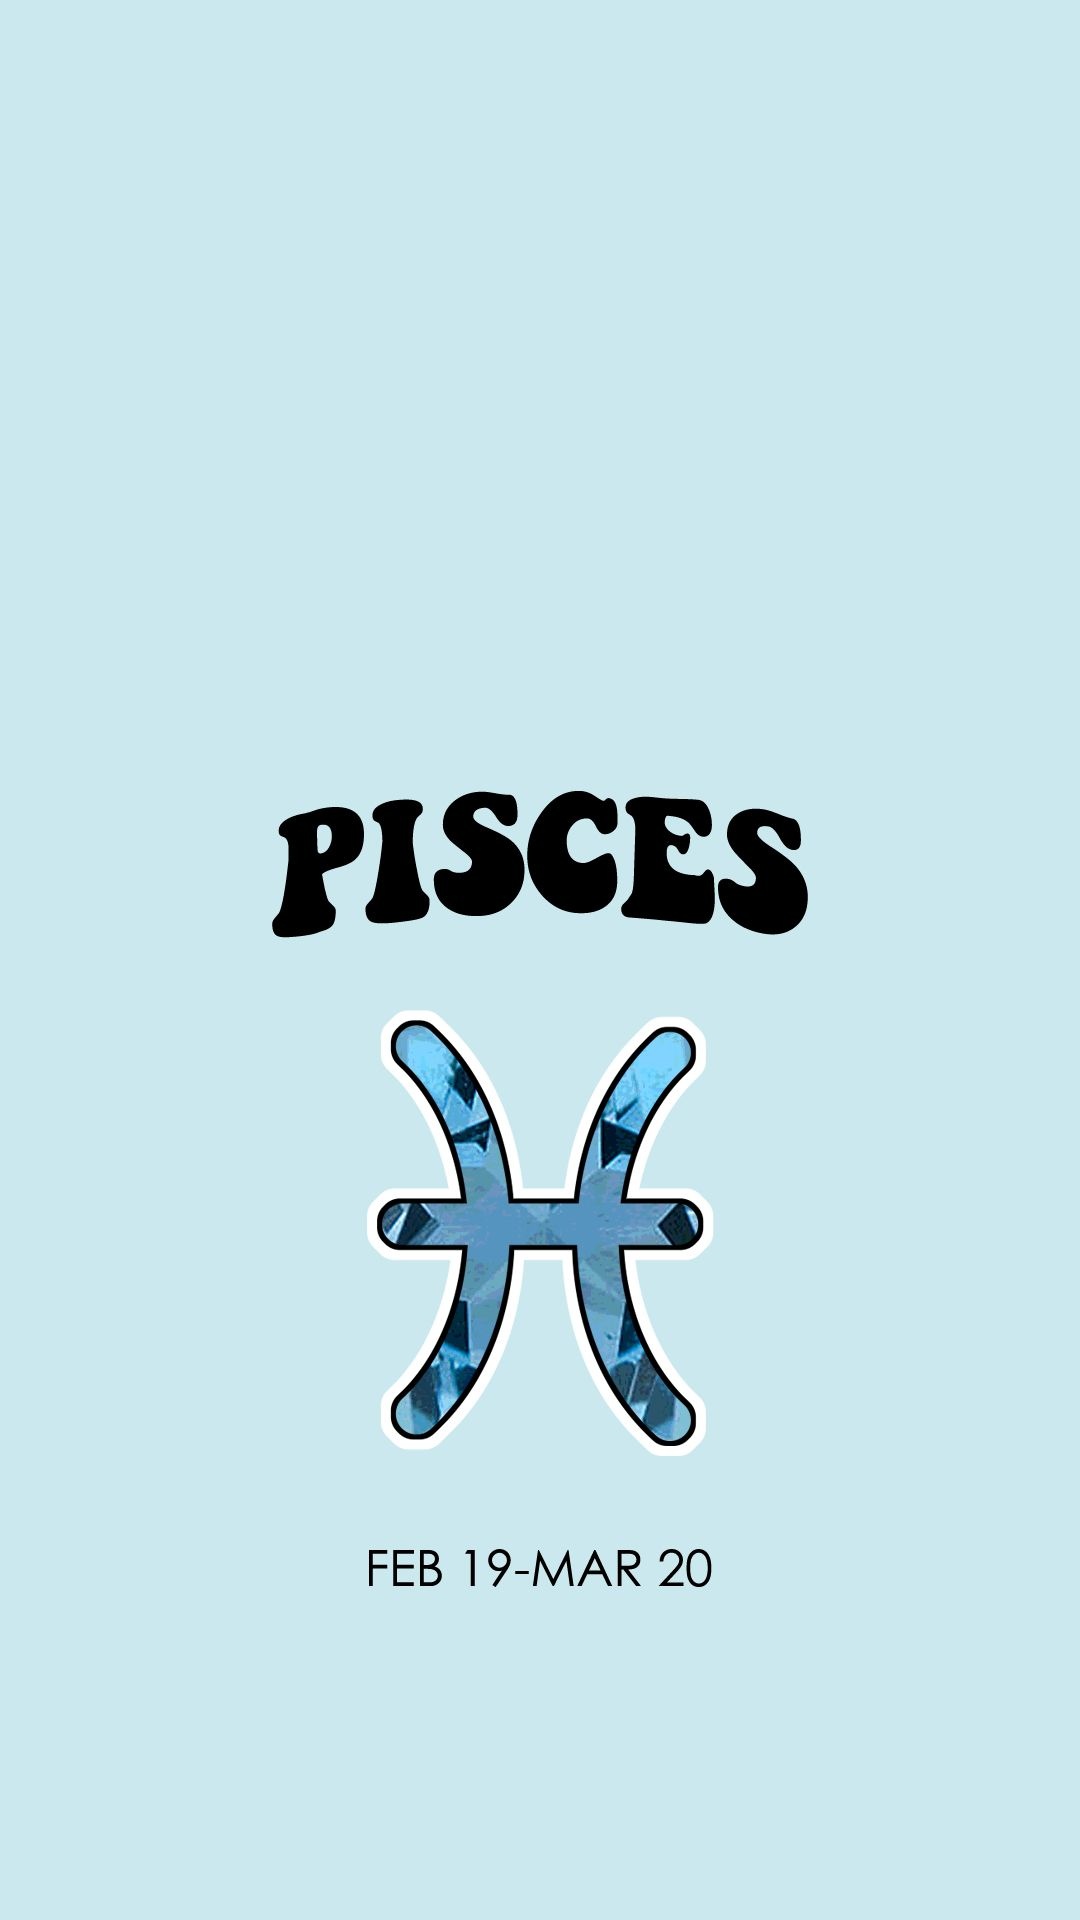 HD wallpaper, Personal Expression, Pisces Zodiac Sign, Phone 1080P Pisces Zodiac Sign Wallpaper Photo, 1080X1920 Full Hd Phone, Zodiac Sign Backgrounds, Free Wallpapers